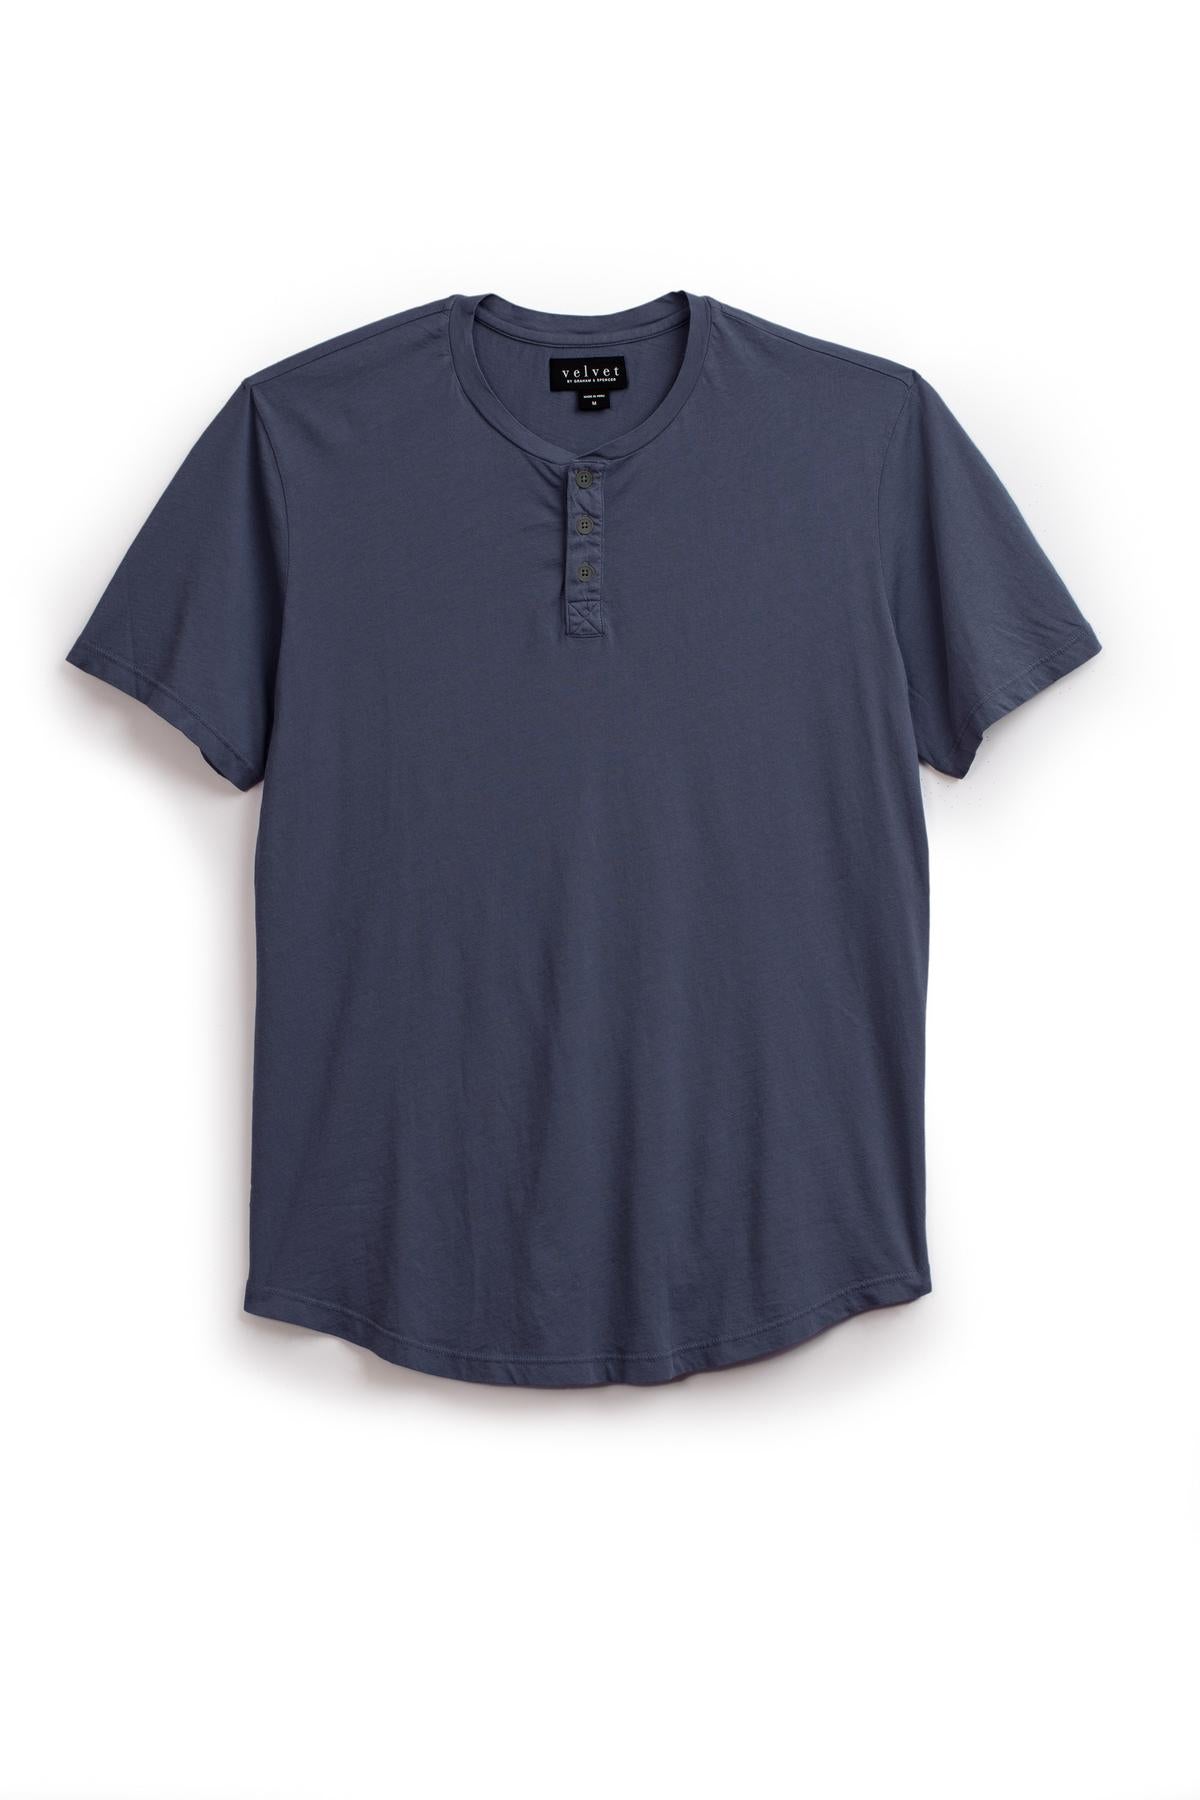   A navy blue FULTON HENLEY tee by Velvet by Graham & Spencer with short sleeves and a button placket, displayed on a plain white background. 